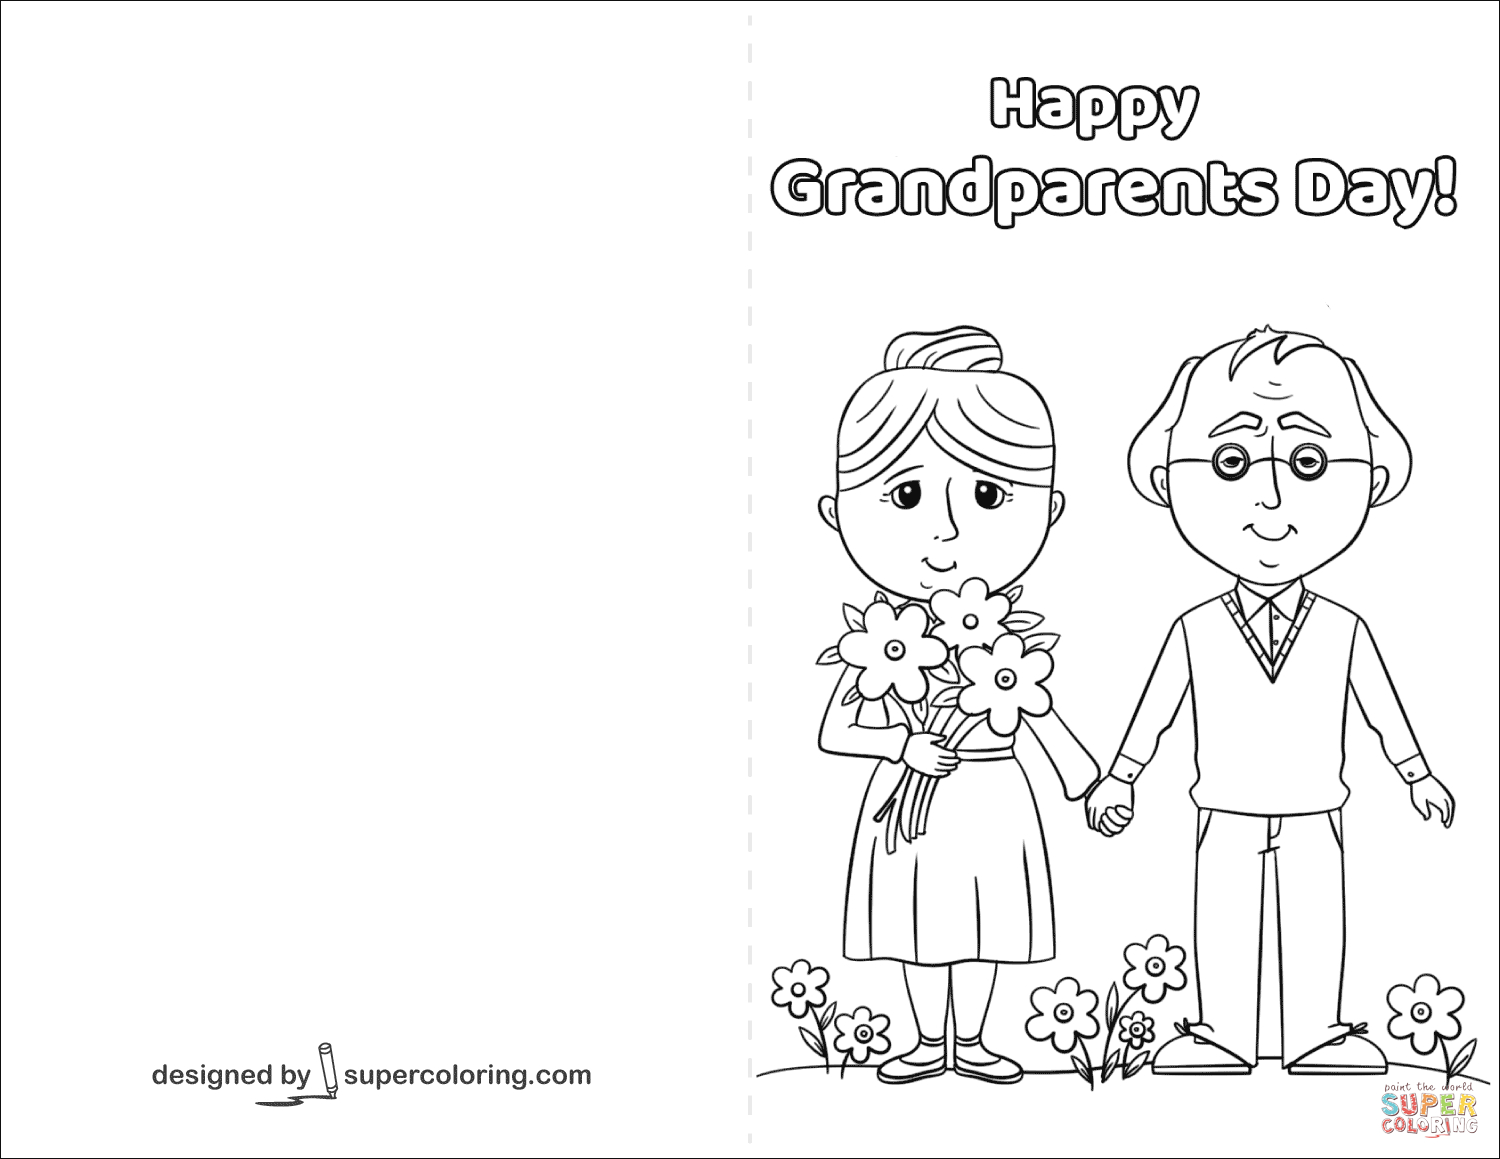 Grandparents Day Cards Printable Free | Free Printable A to Z